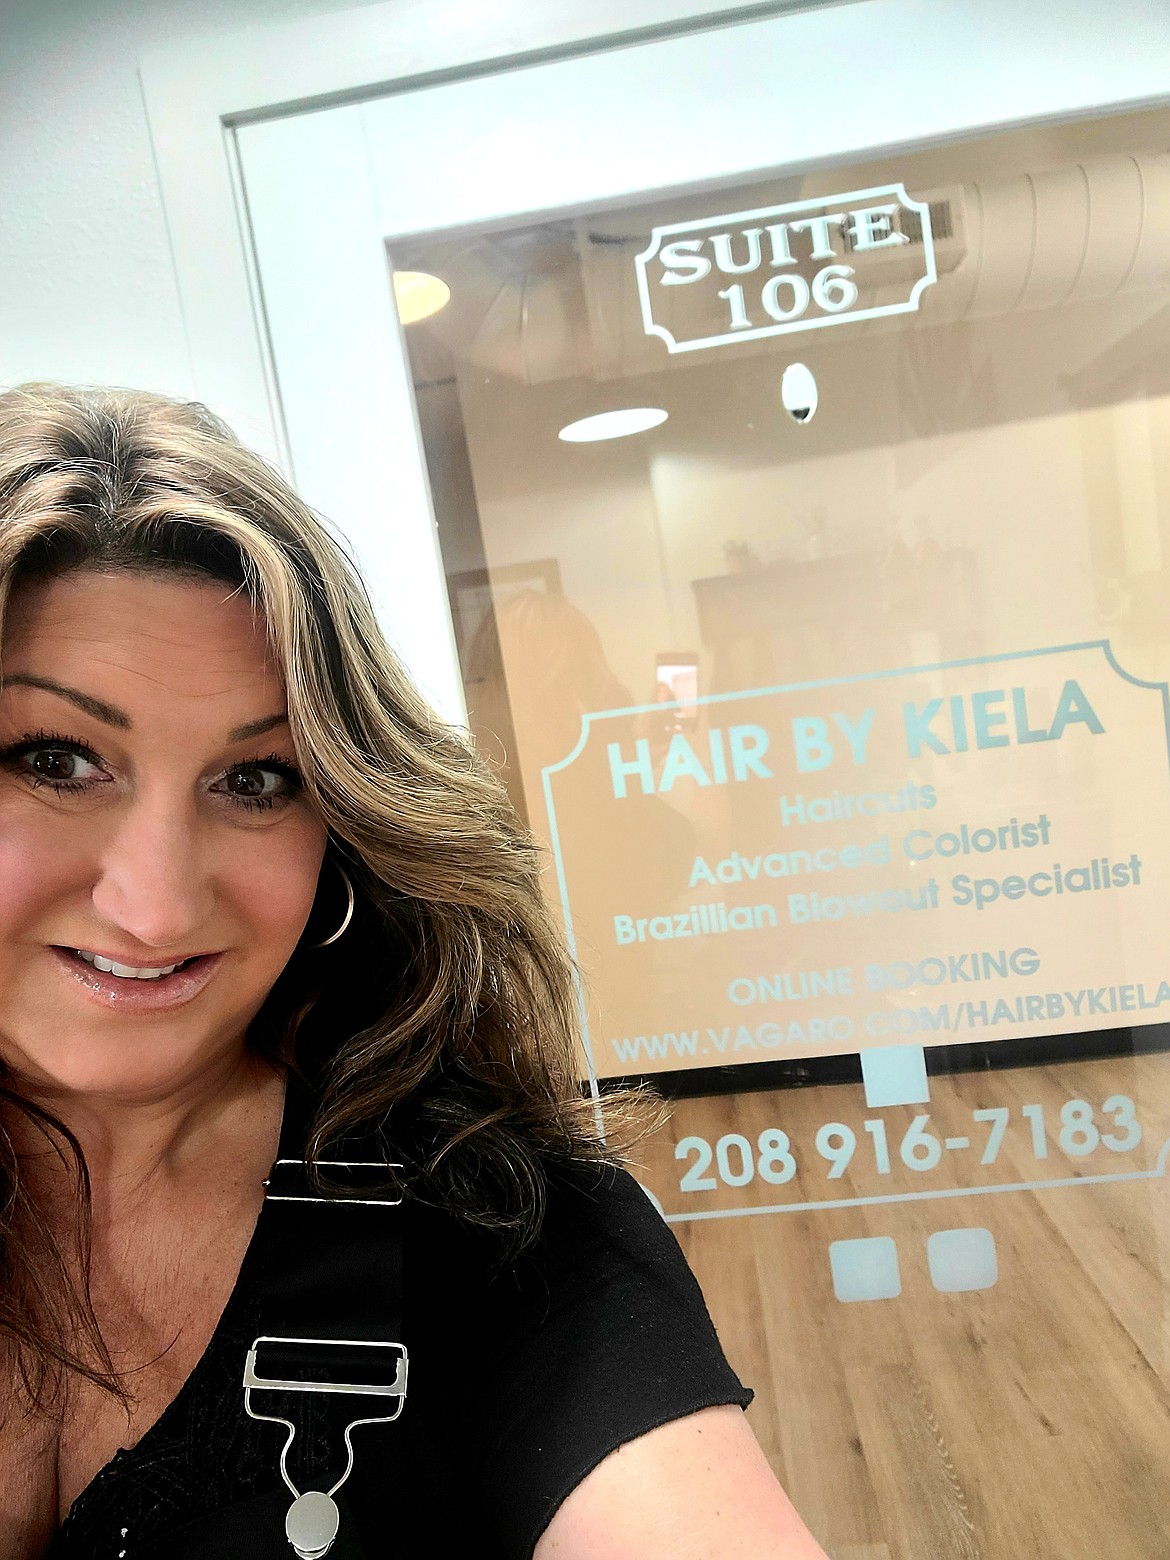 Courtesy photo
Kiela Long has opened Hair By Kiela at 849 N. Fourth St. (Suite 106 in the Midtown Commons Building).